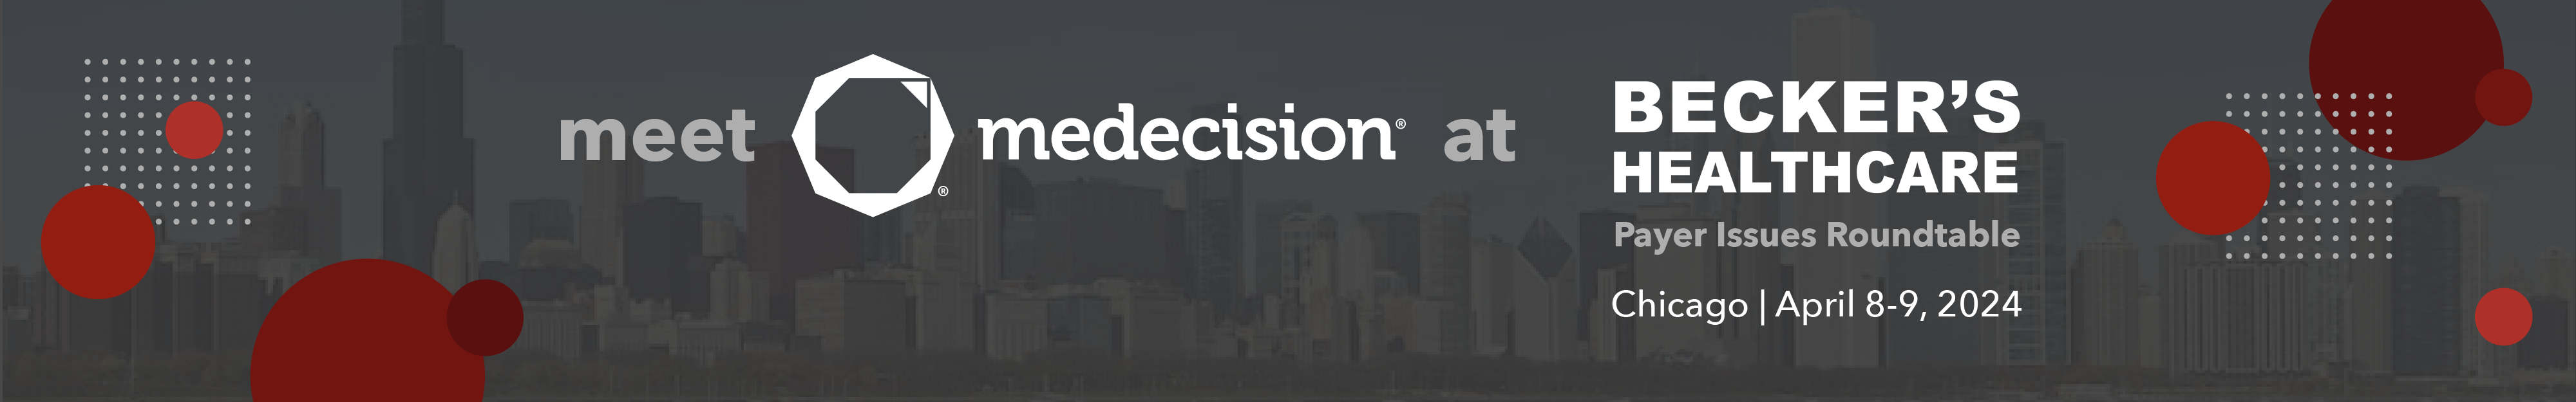 Meet Medecision at Becker's Payer Issues Roundtable in Chicago, April 8 - 9, 2024!